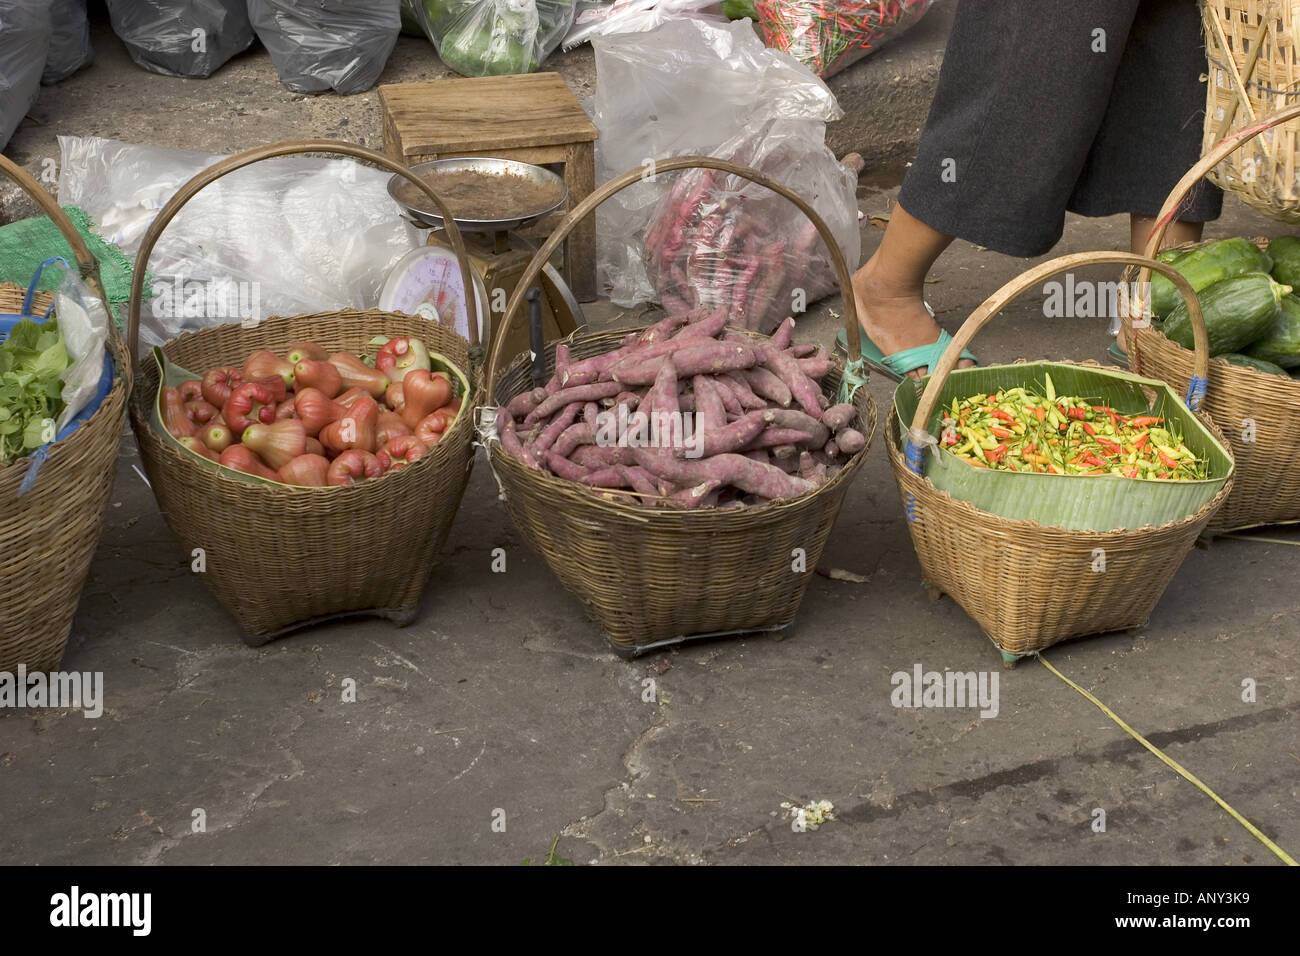 Asia, Thailand, Khon Kaen, Baskets with fruits and vegetable. Stock Photo